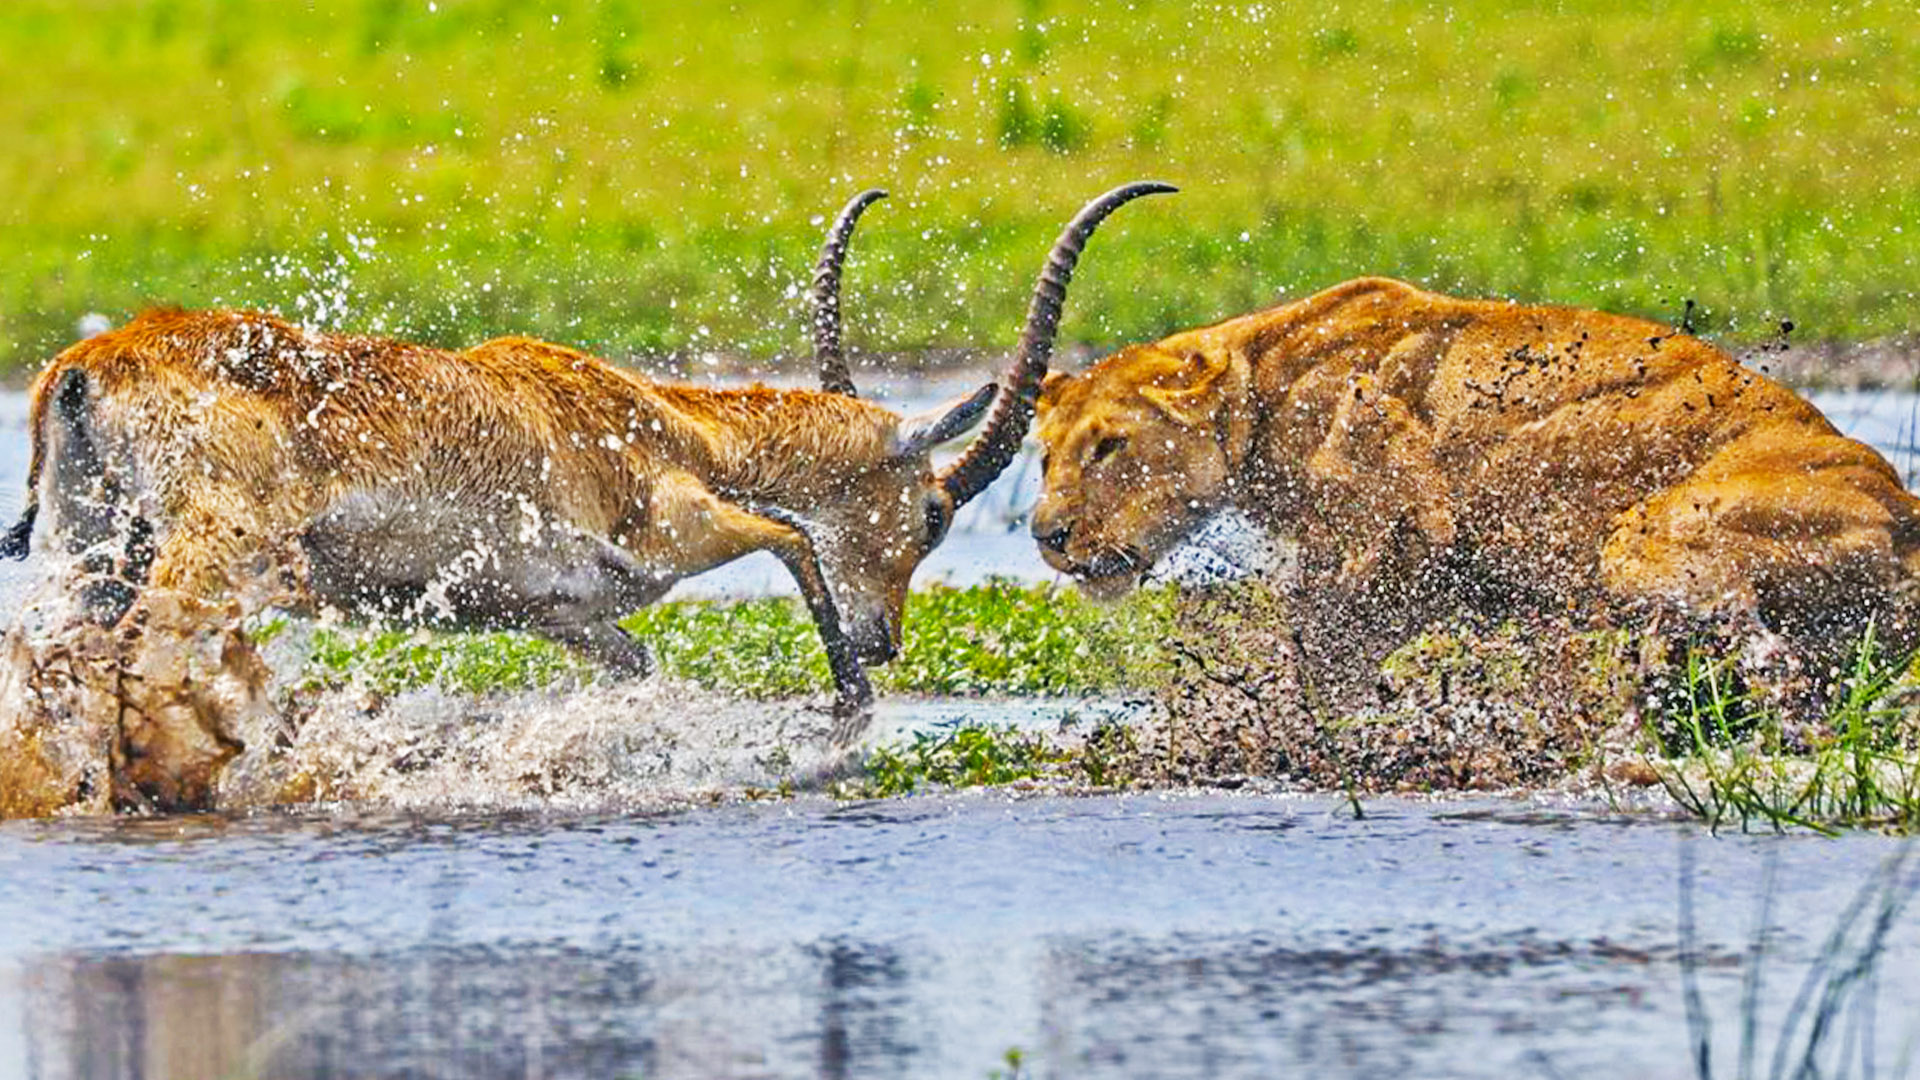 Antelope Turns to Fight Back Against Lion in River